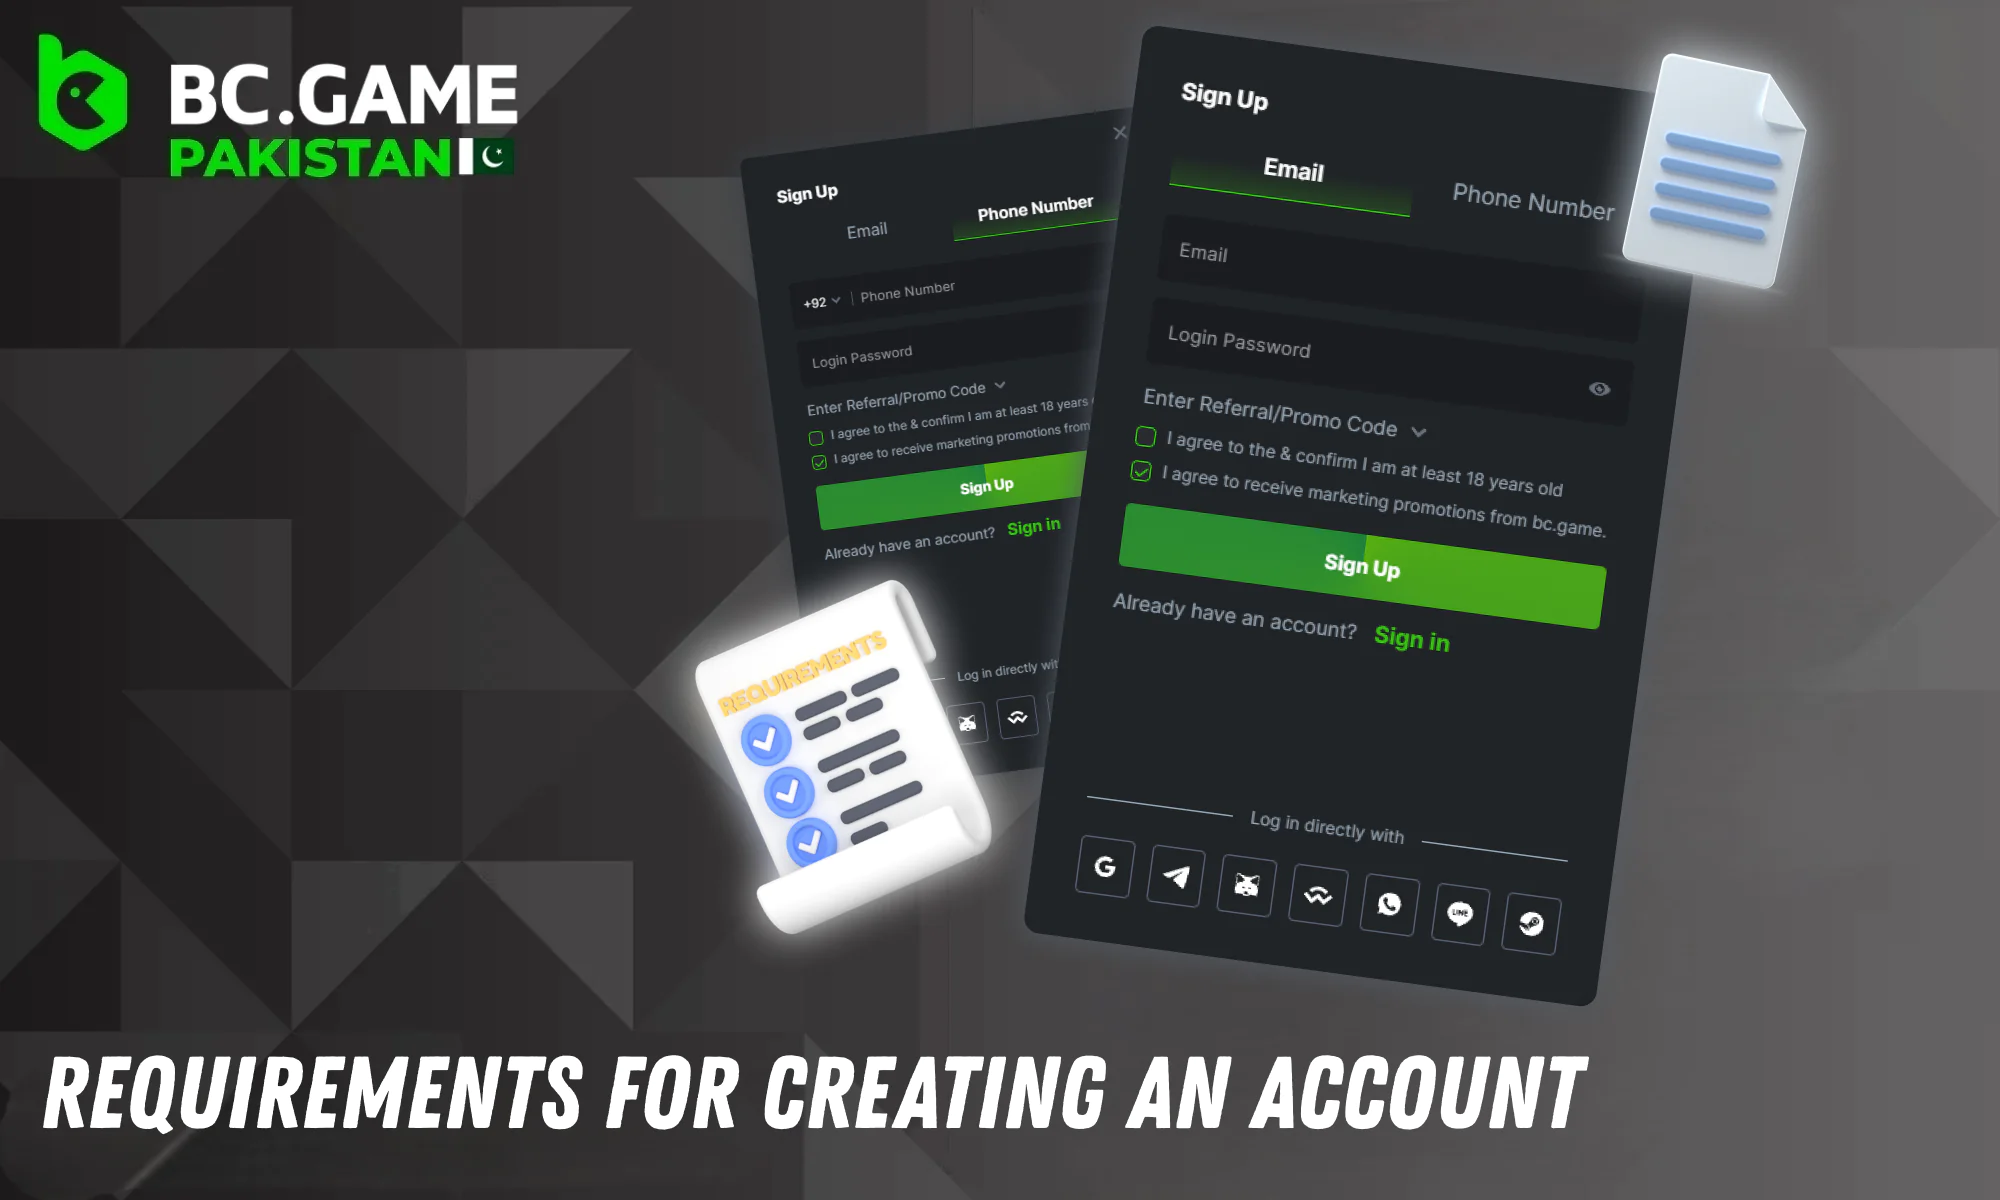 Requirements ensures a smooth account creation process on the platform